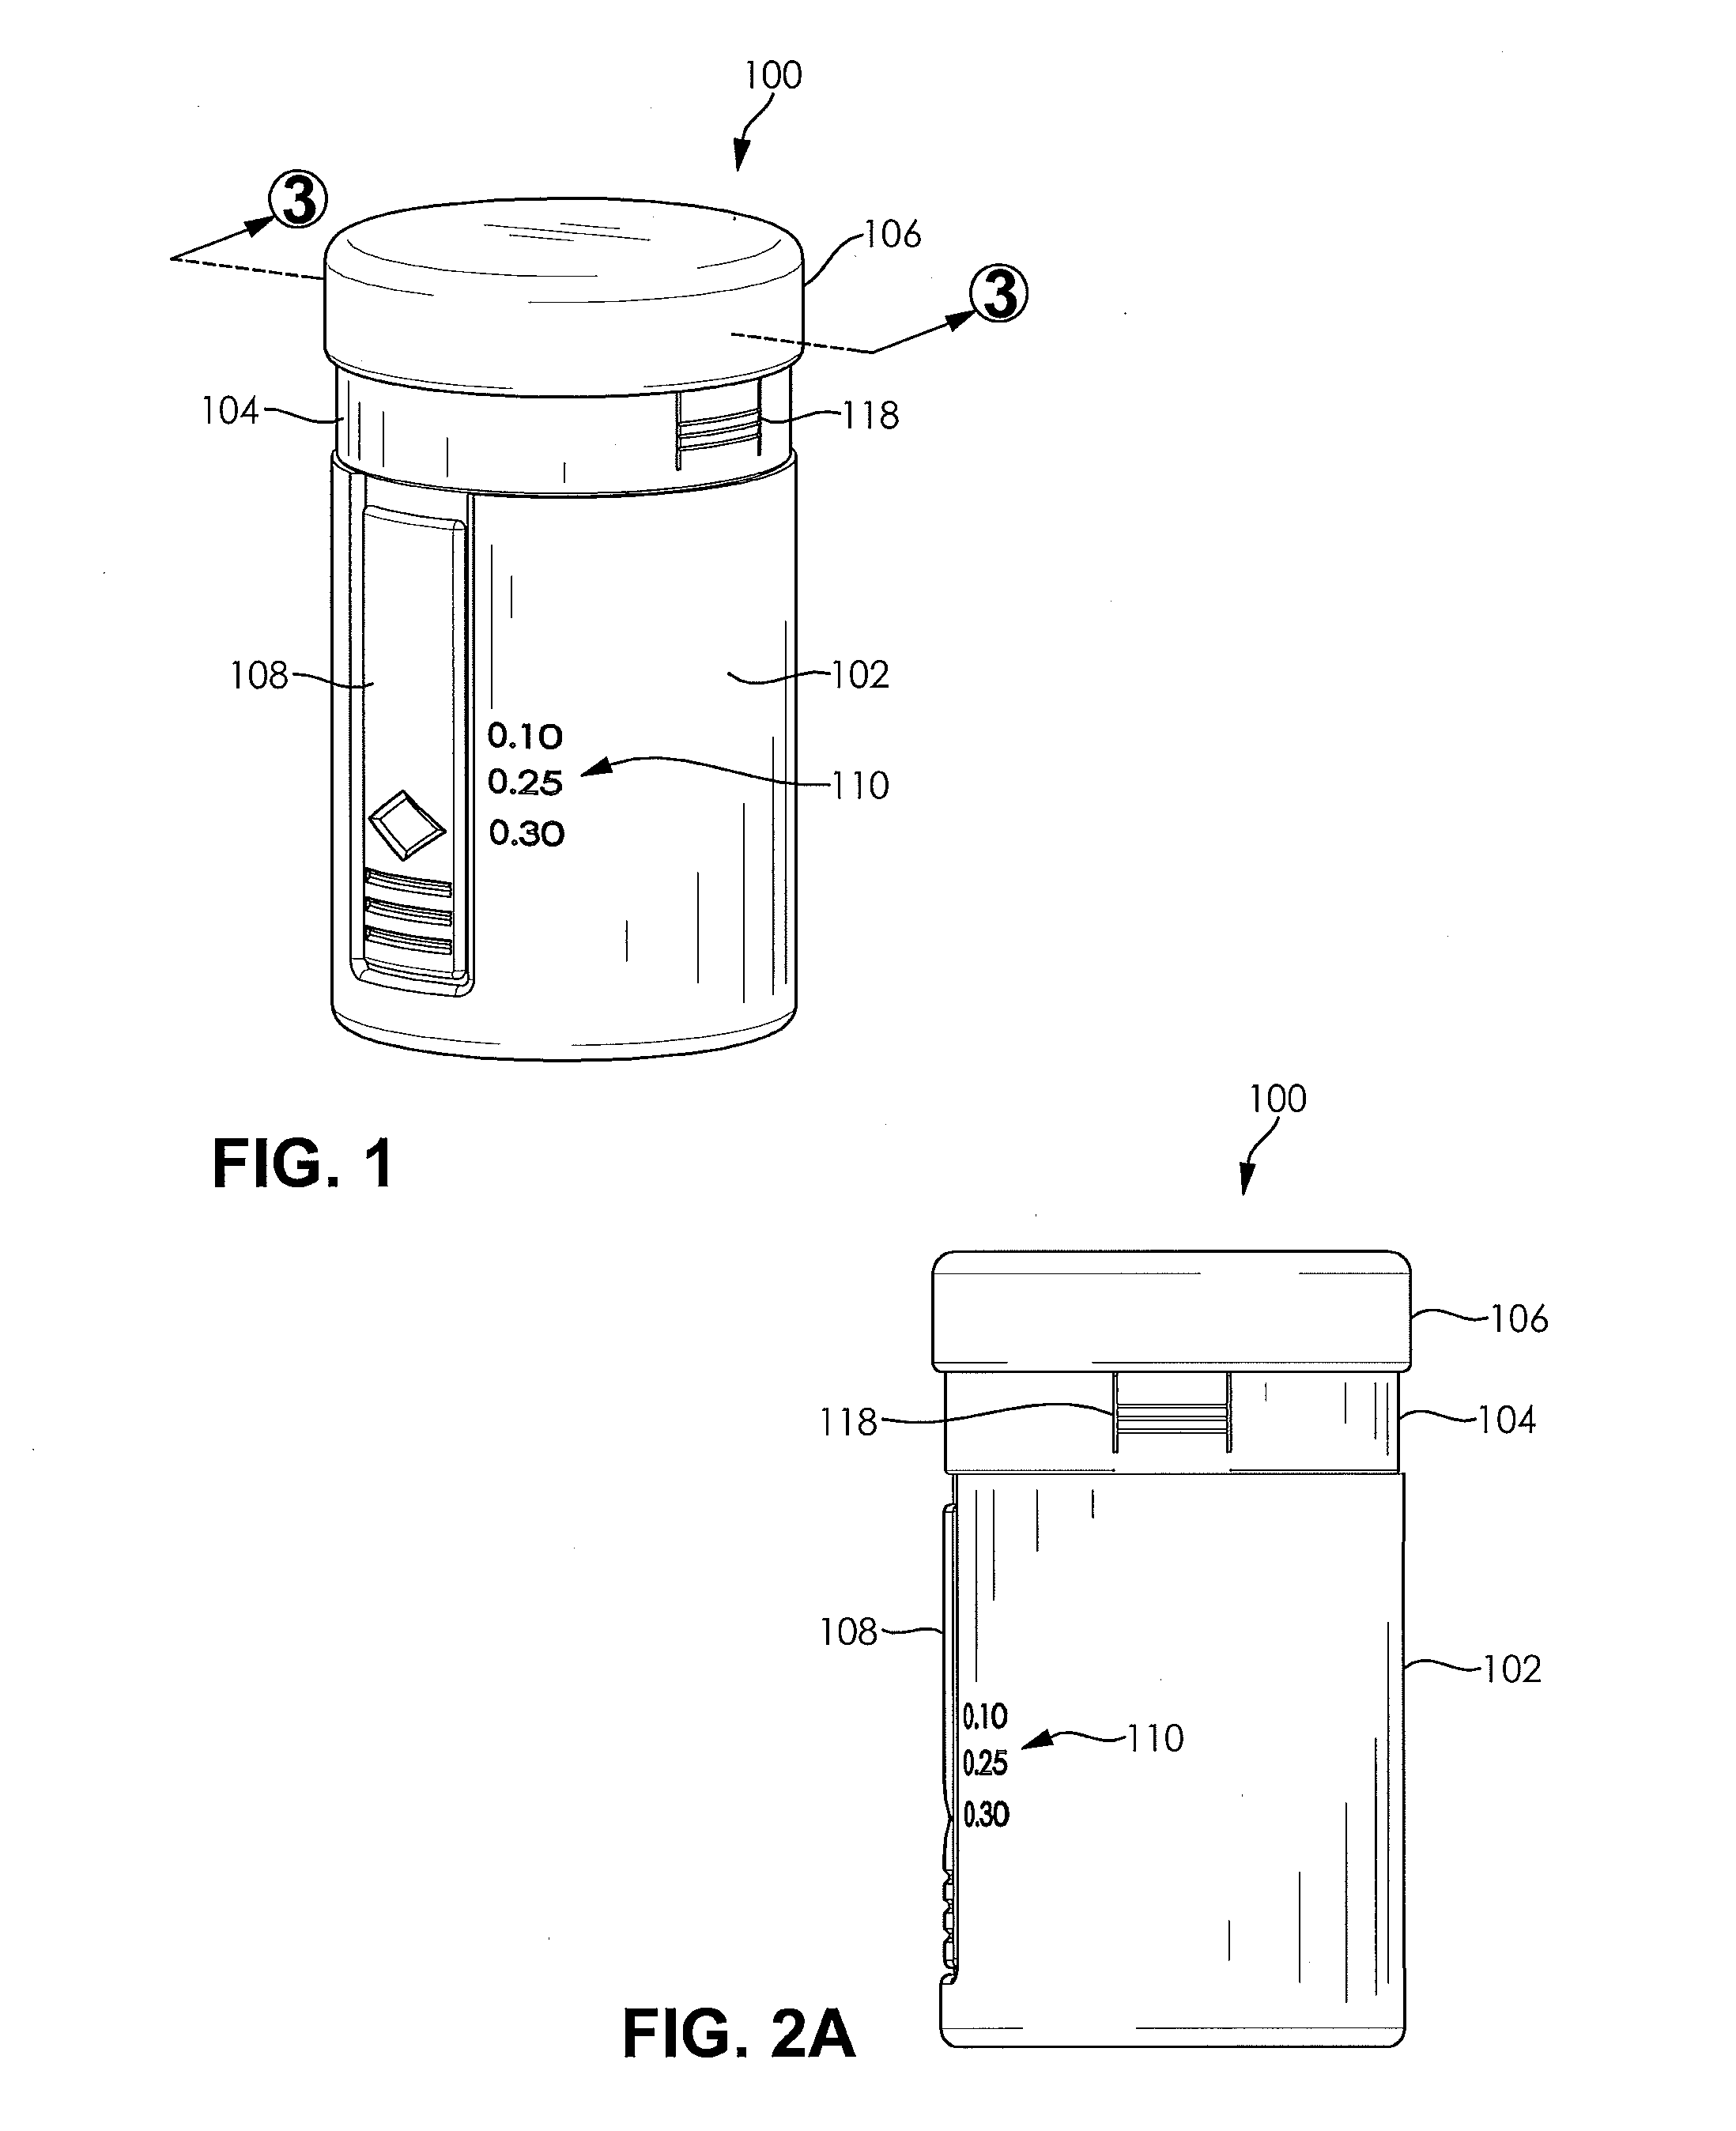 Multi-dose dispenser and applicator for topical medications